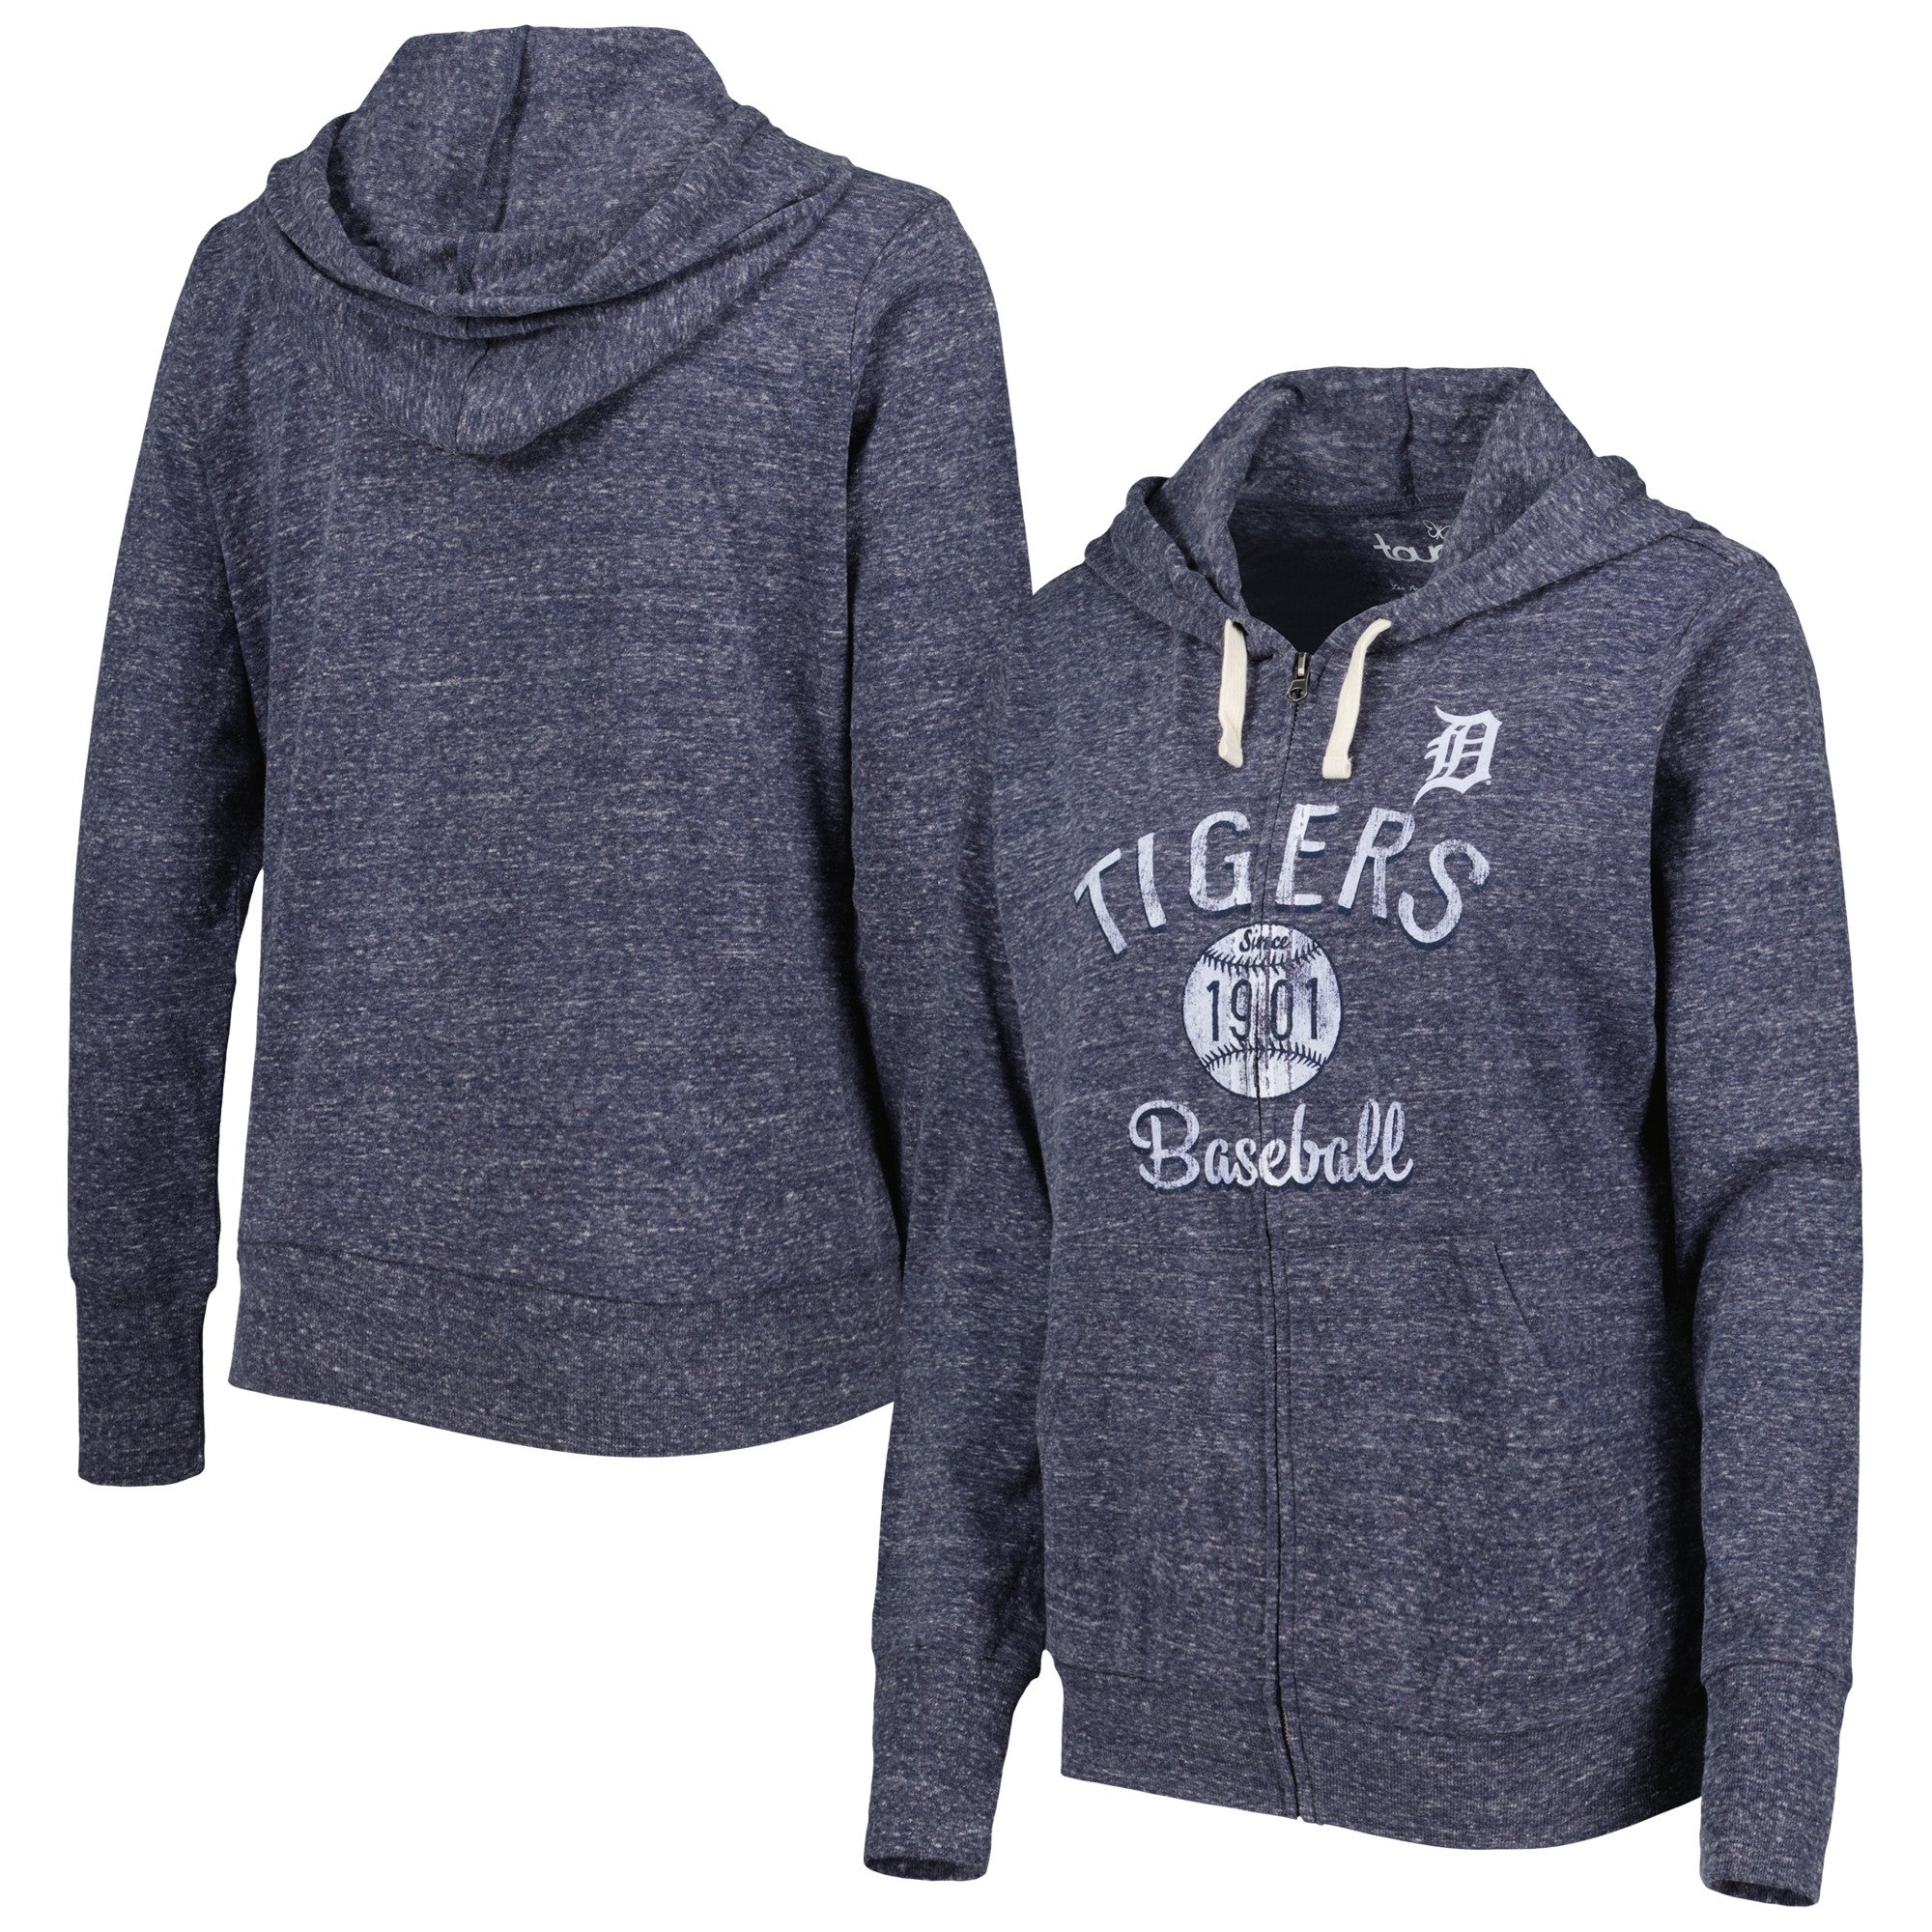 Touch Tigers Training Camp Lightweight Full-Zip Hoodie